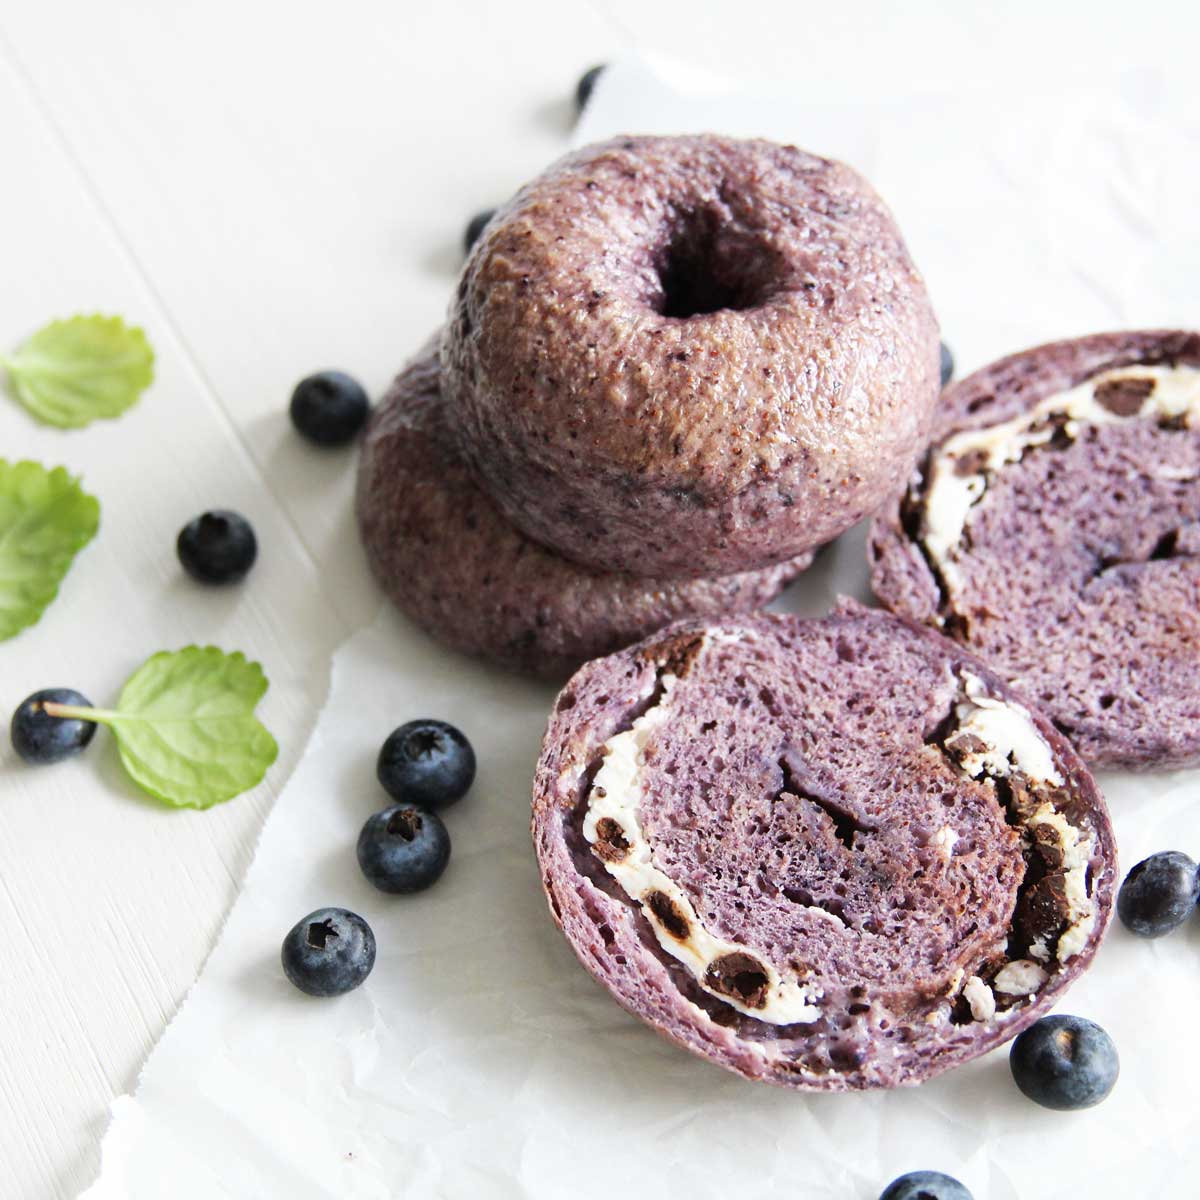 Chocolate Chip Blueberry Bagels (Easy, Cream Cheese Stuffed Bagel Recipe) - Strawberry Whipped Cream